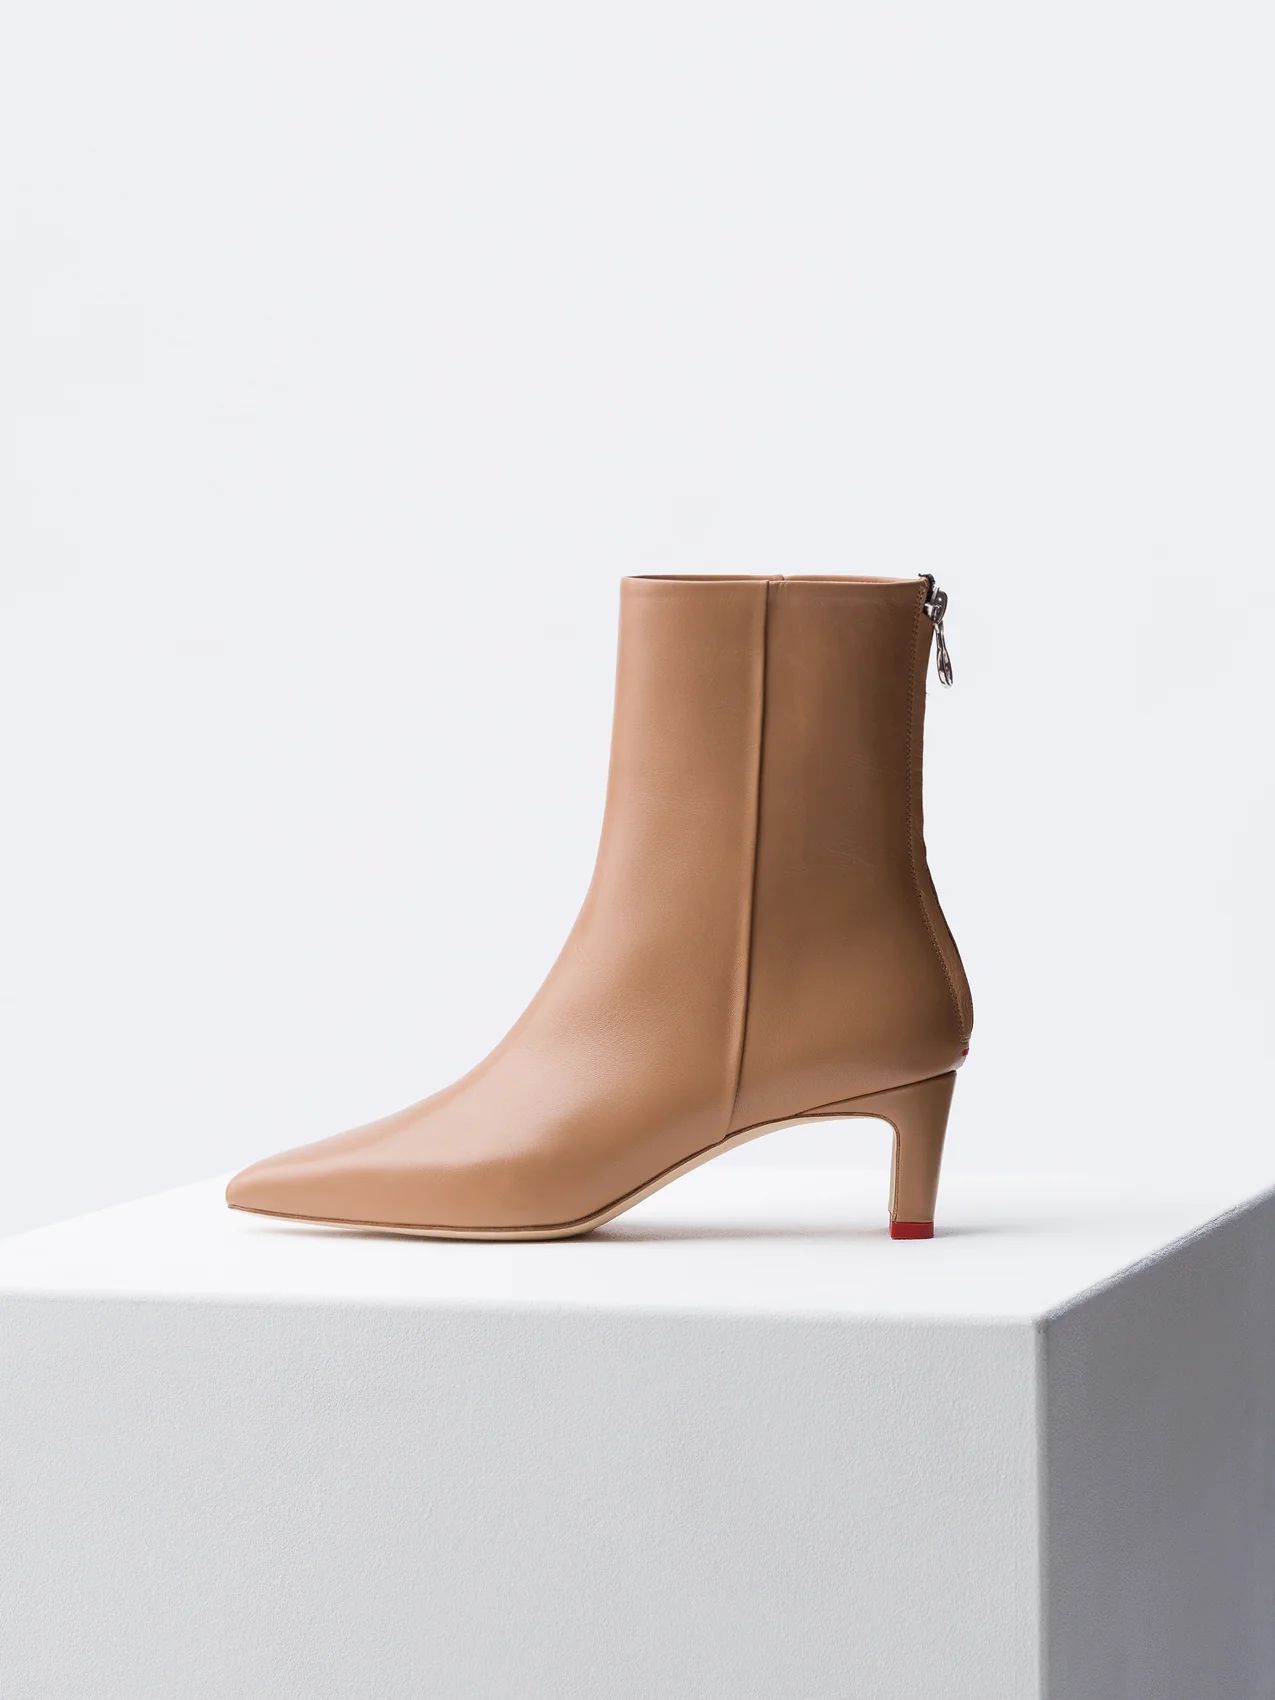 IVY embodies aeyde's approach to everyday wearable luxury. This is a super-slick mid-height ankle... | aeyde.com